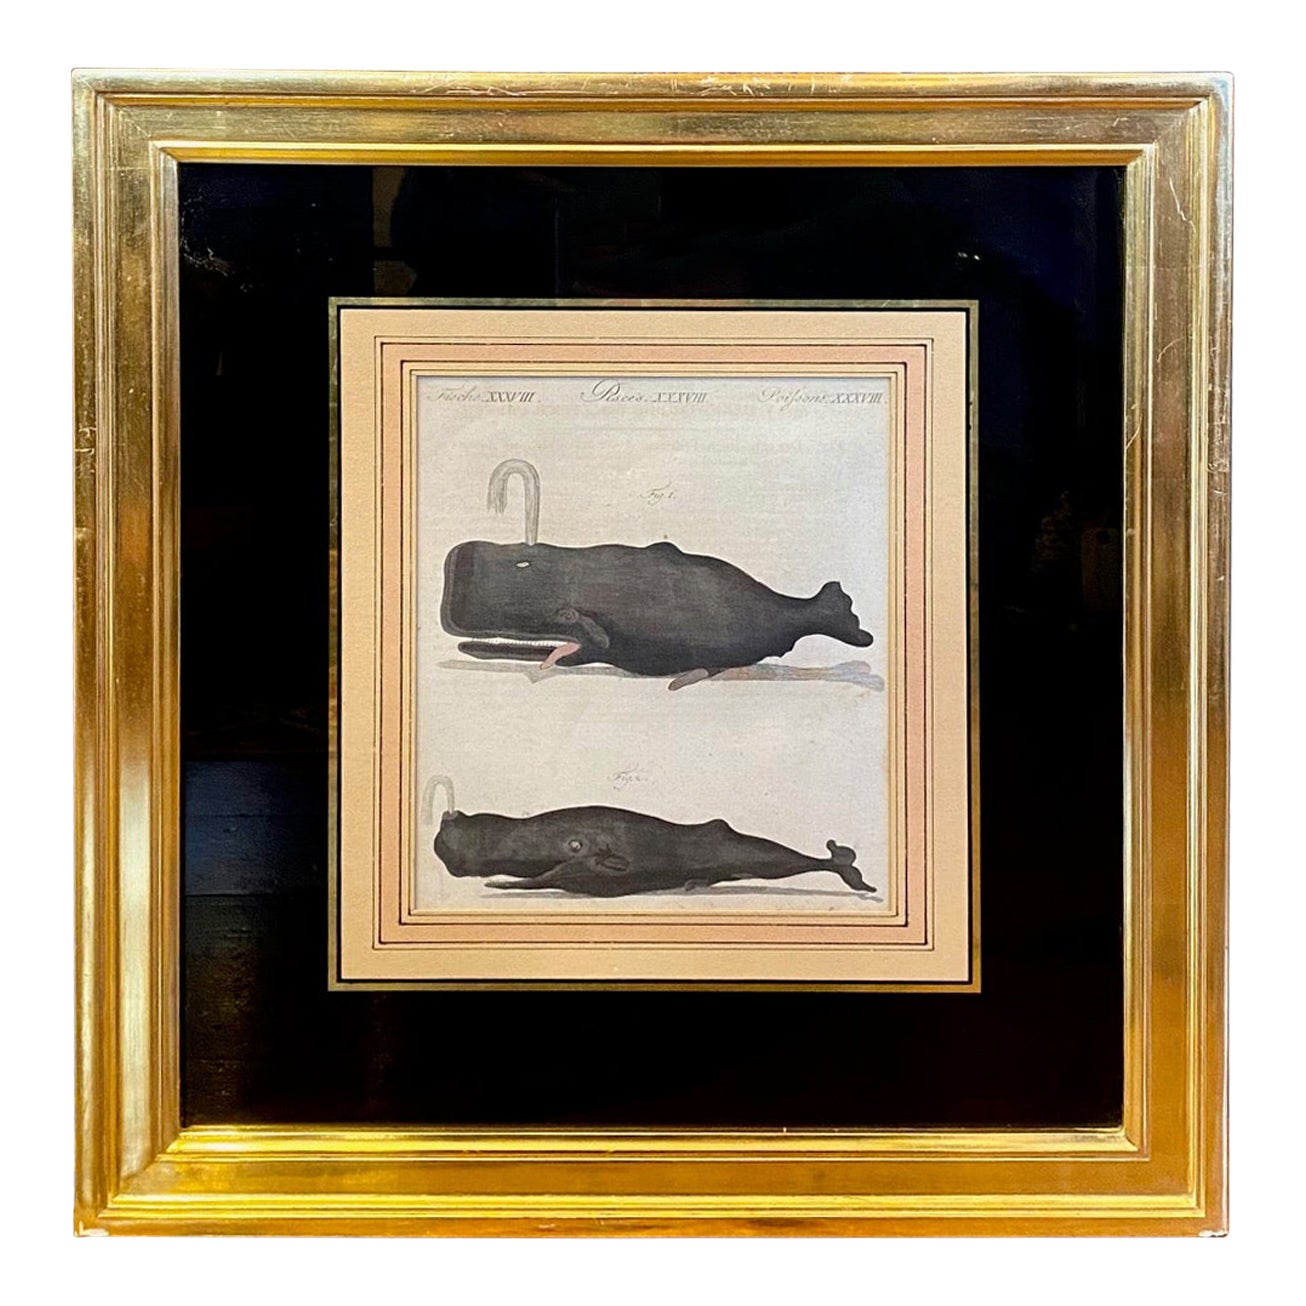 18th Century Engraving of Sperm Whales, by Bertuch, 1790